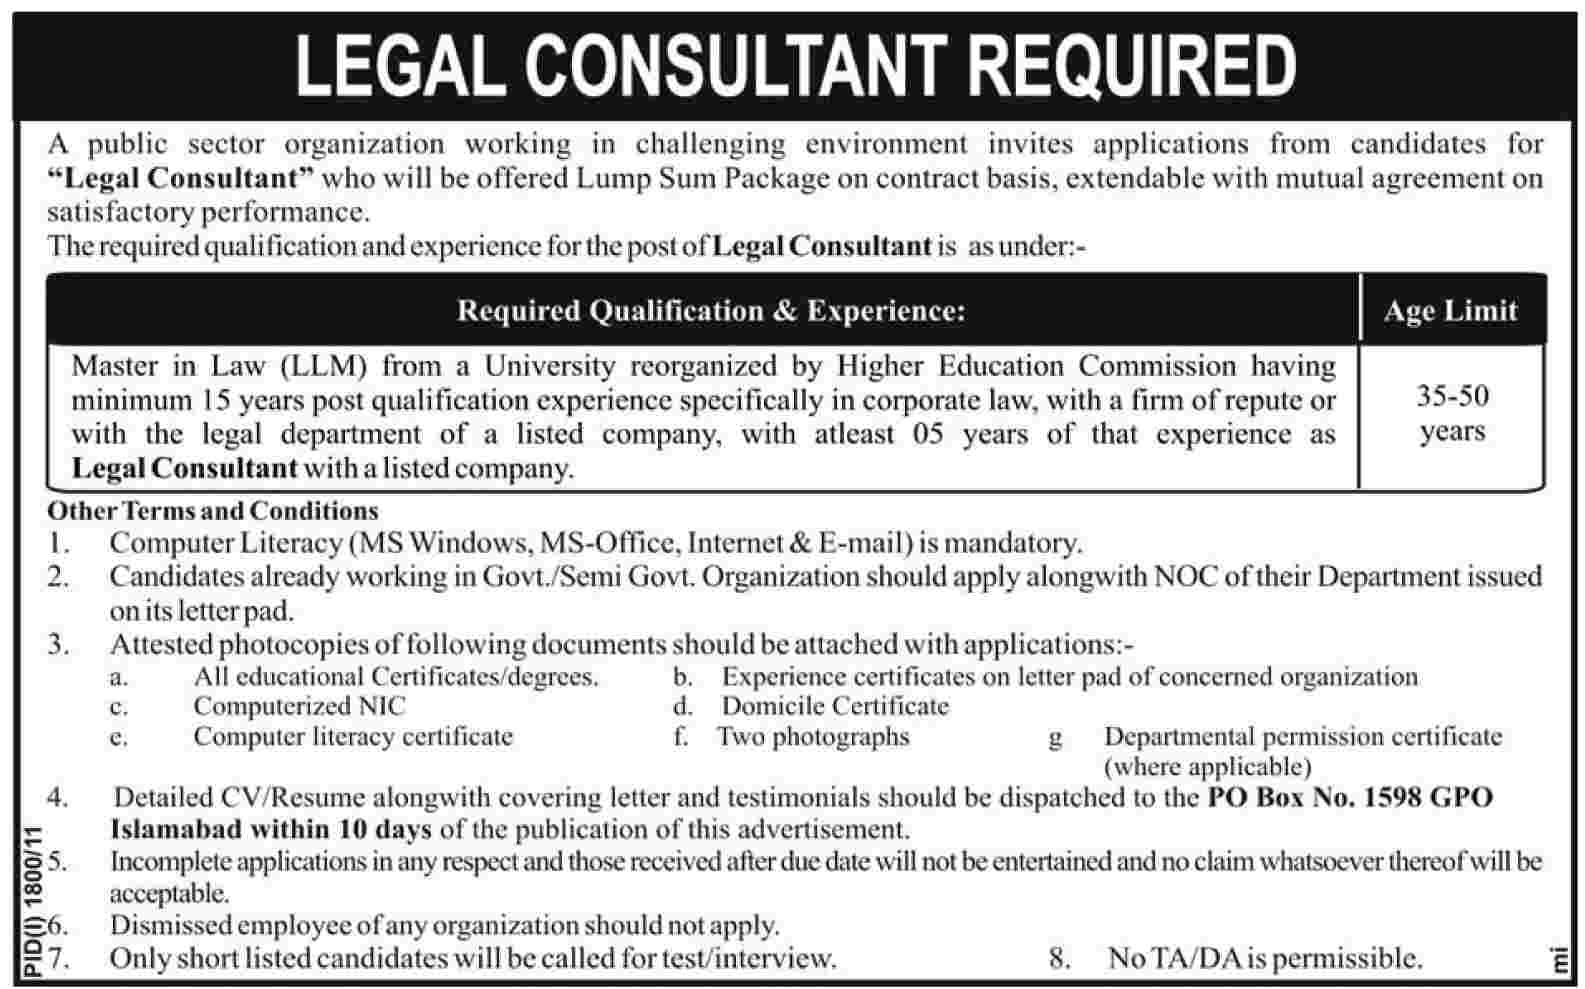 Legal Consultant Required by Public Sector Organization